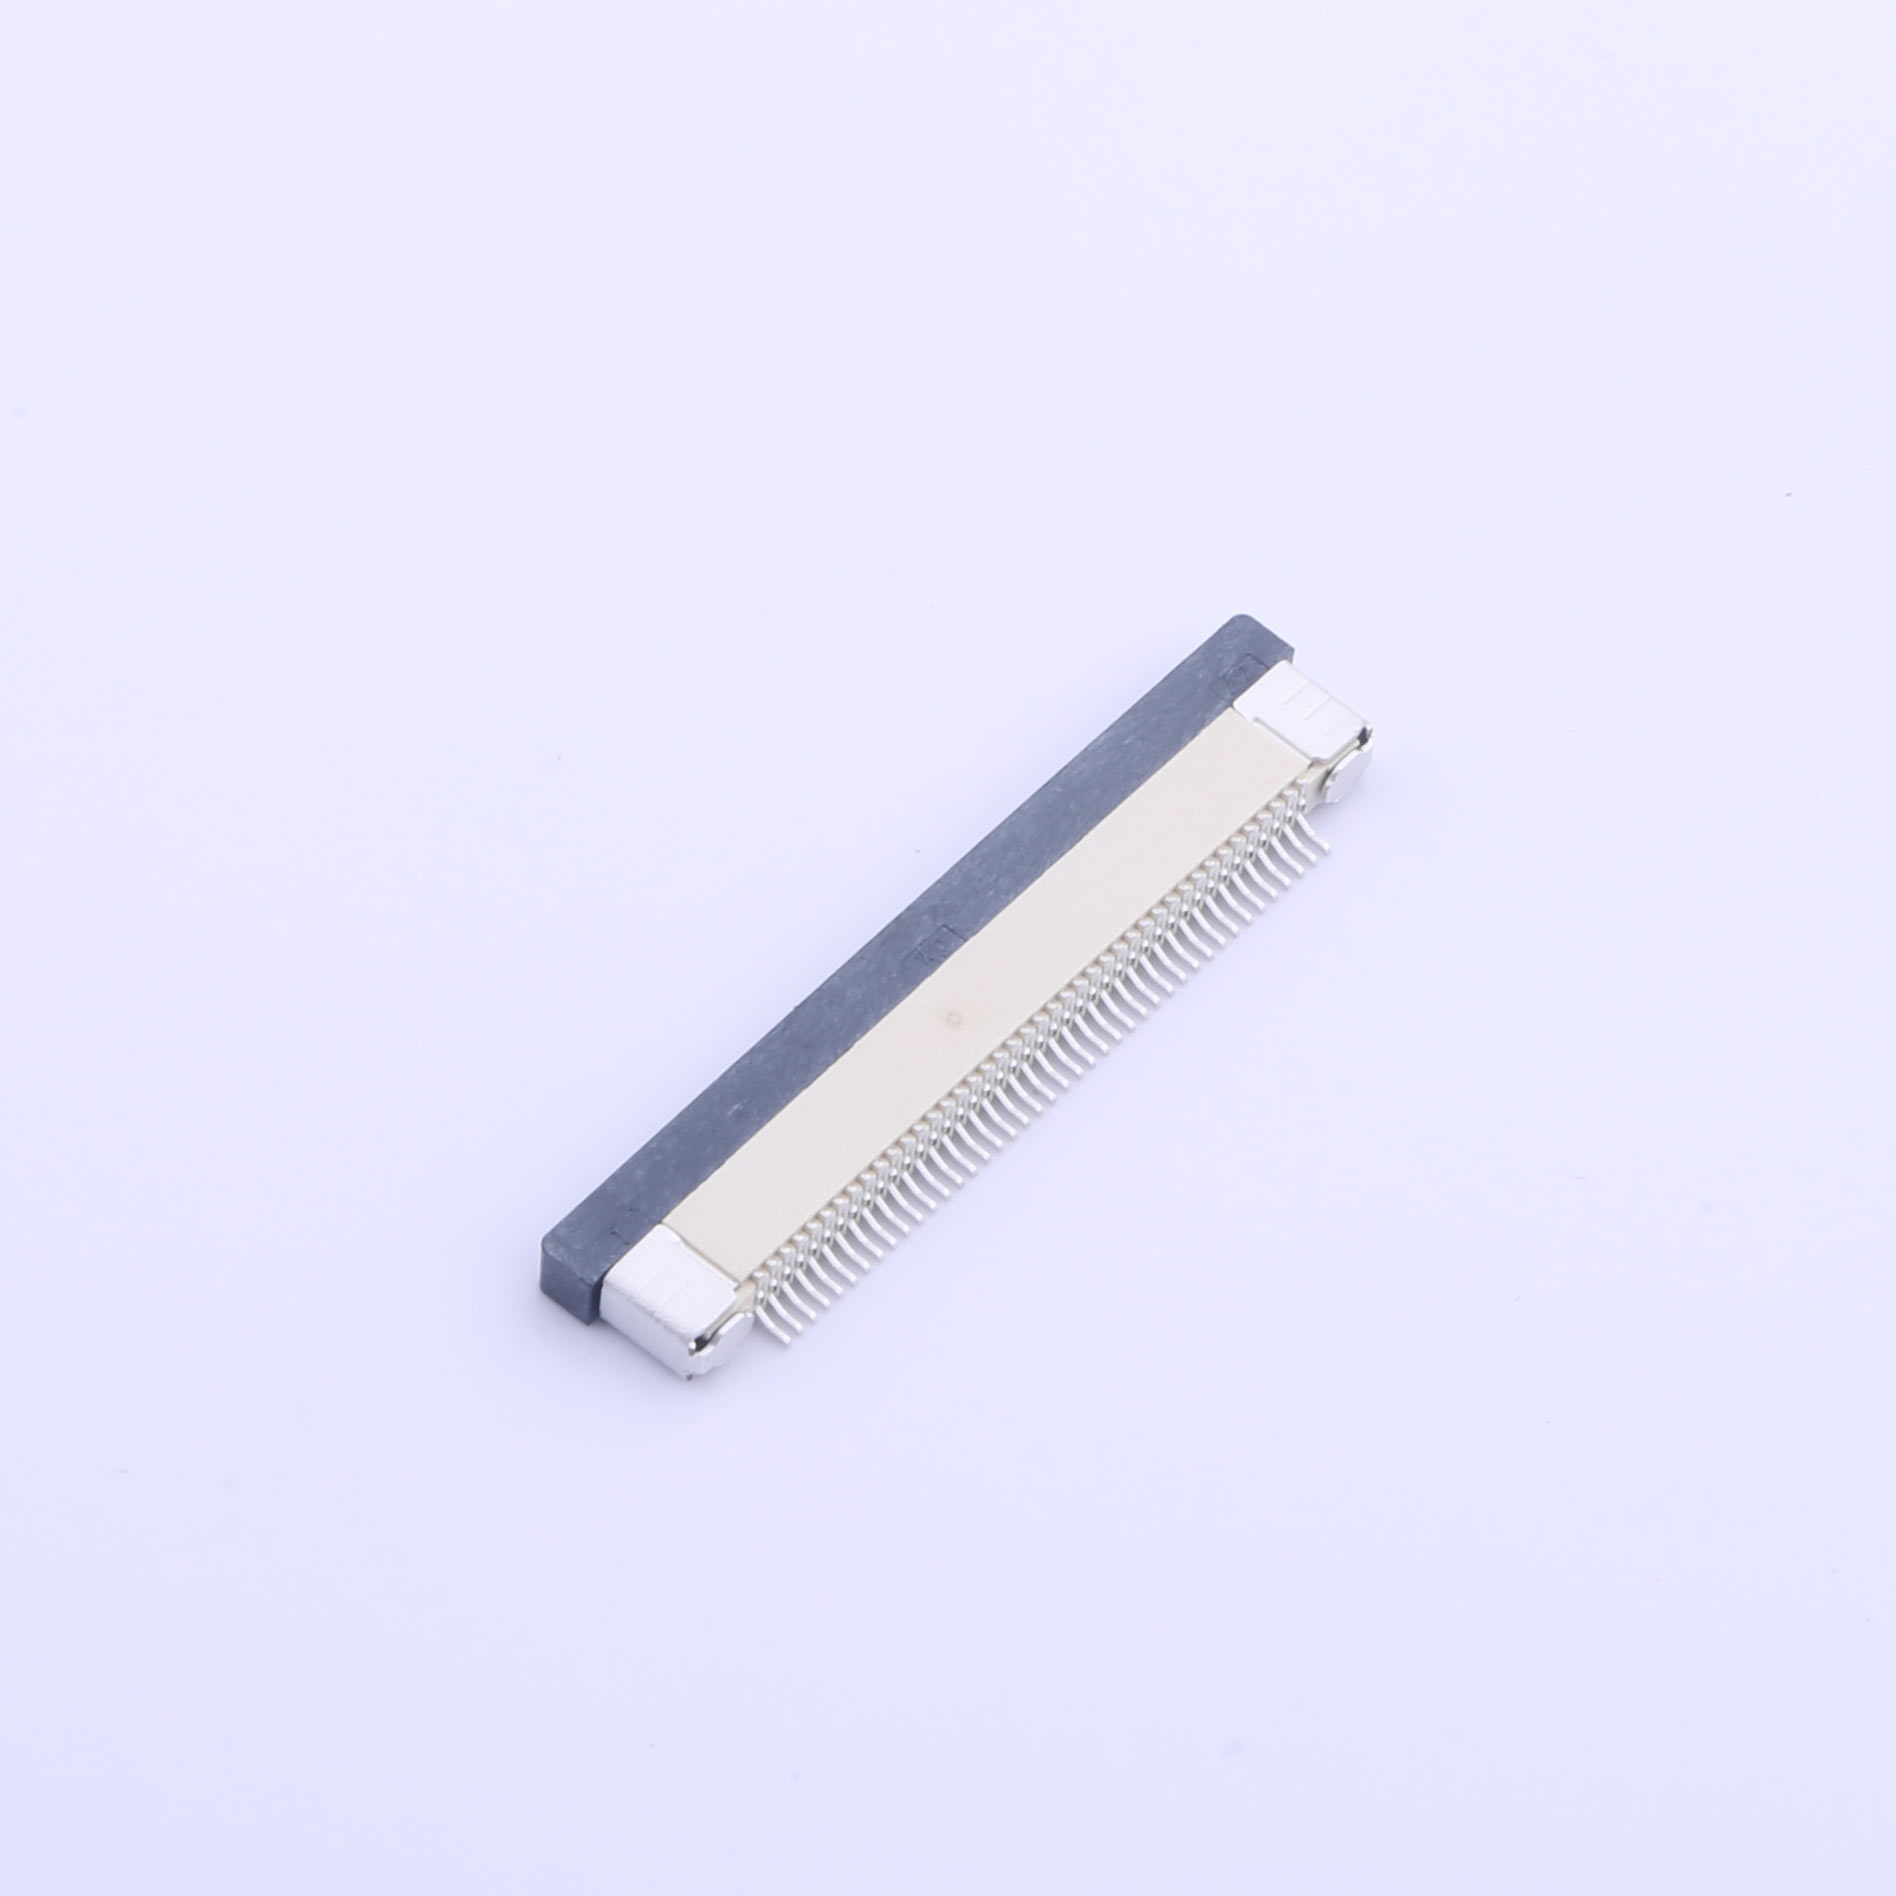 Kinghelm 0.5mm Pitch FPC FFC Connector 42P Height - KH-CL0.5-H2.0-42pin